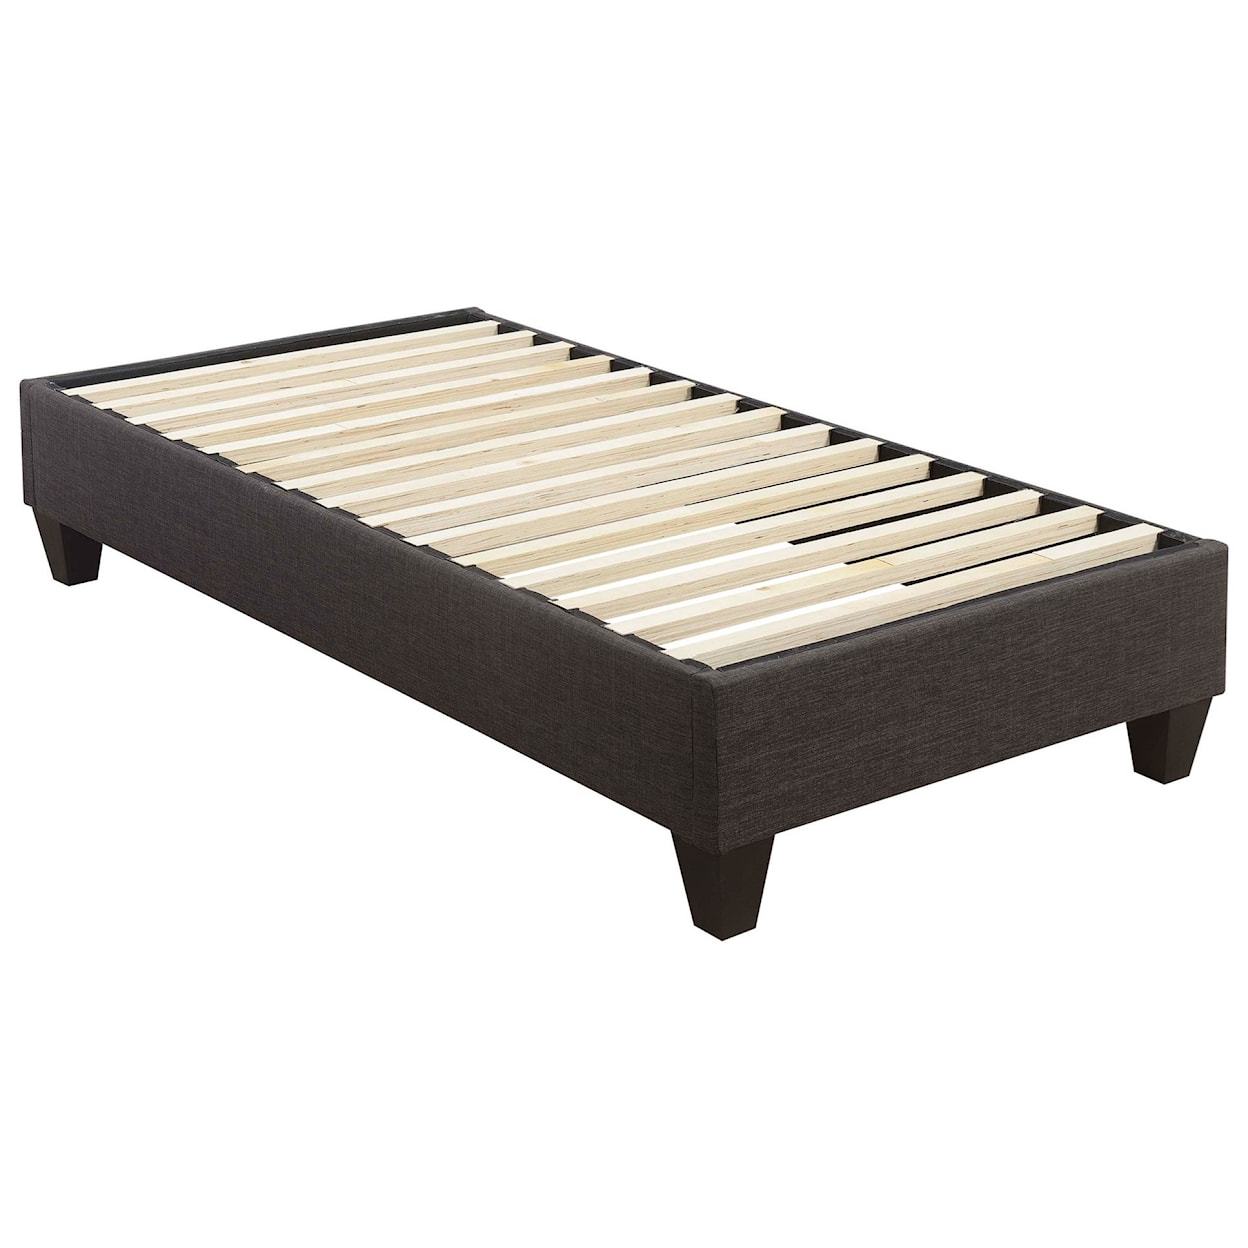 Elements Abby Twin Platform Bed